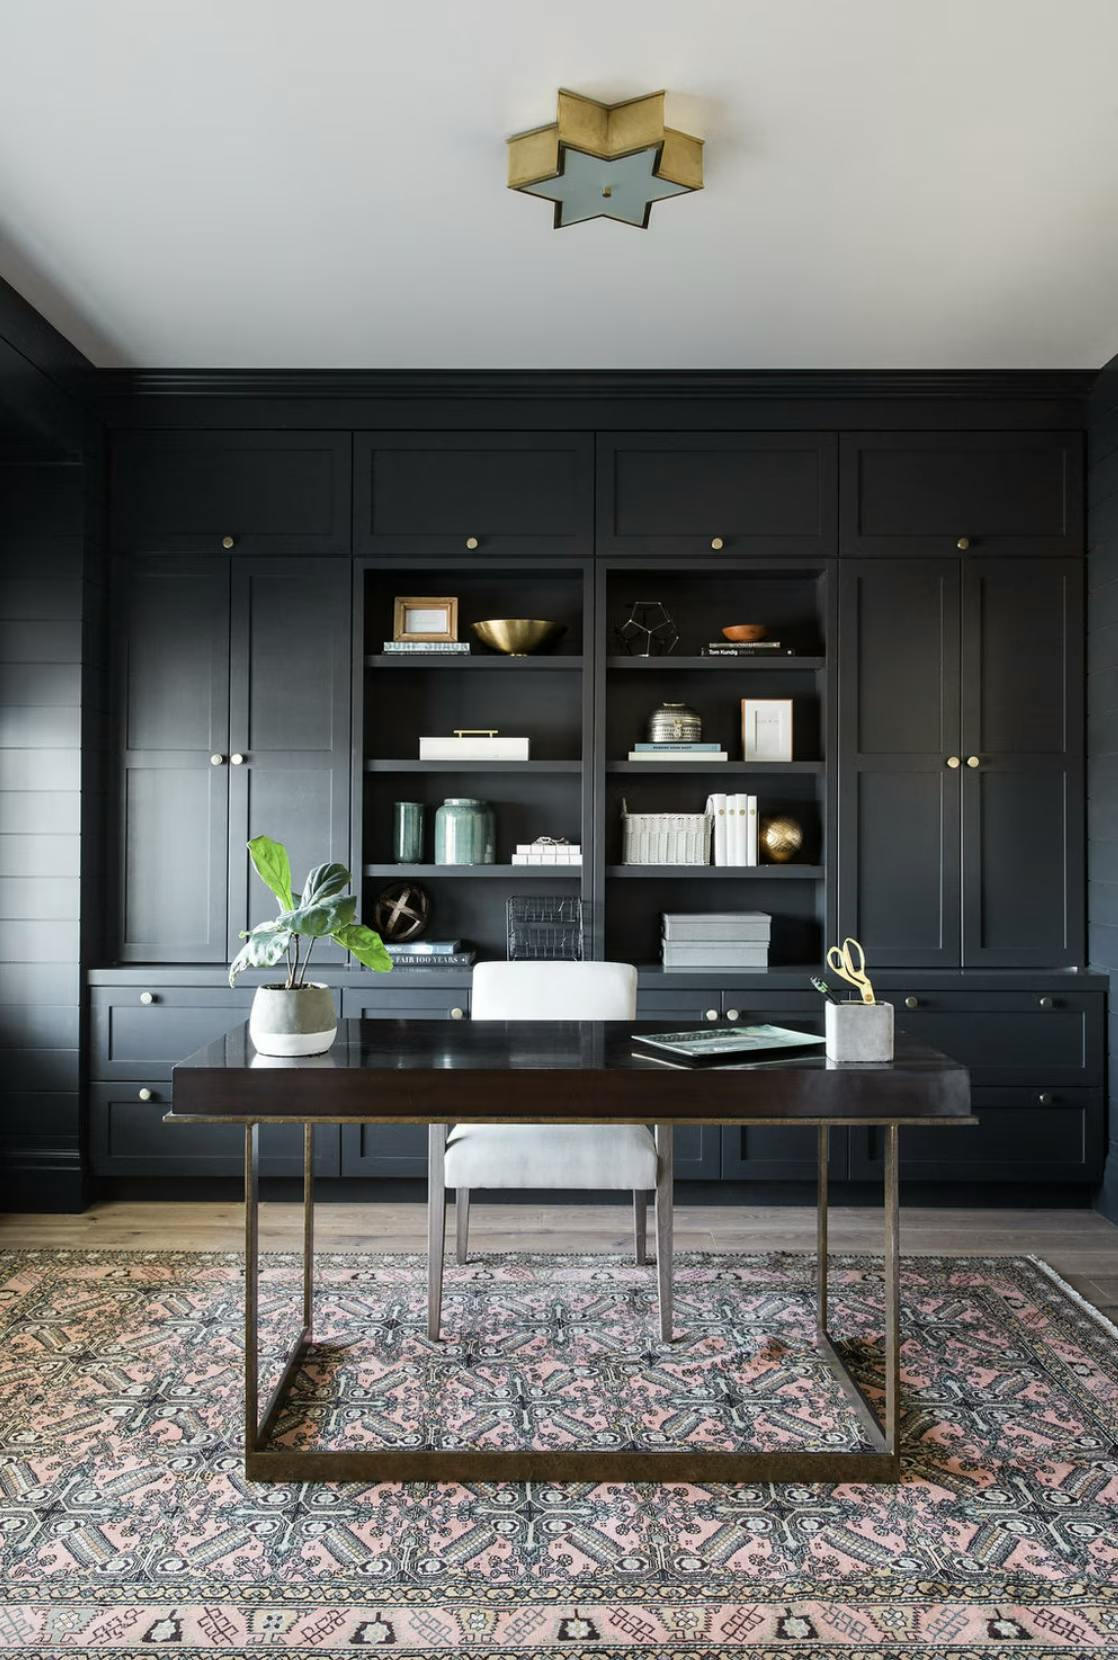 Black Magic by Sherwin-Williams, featured in and photo by Studio McGee